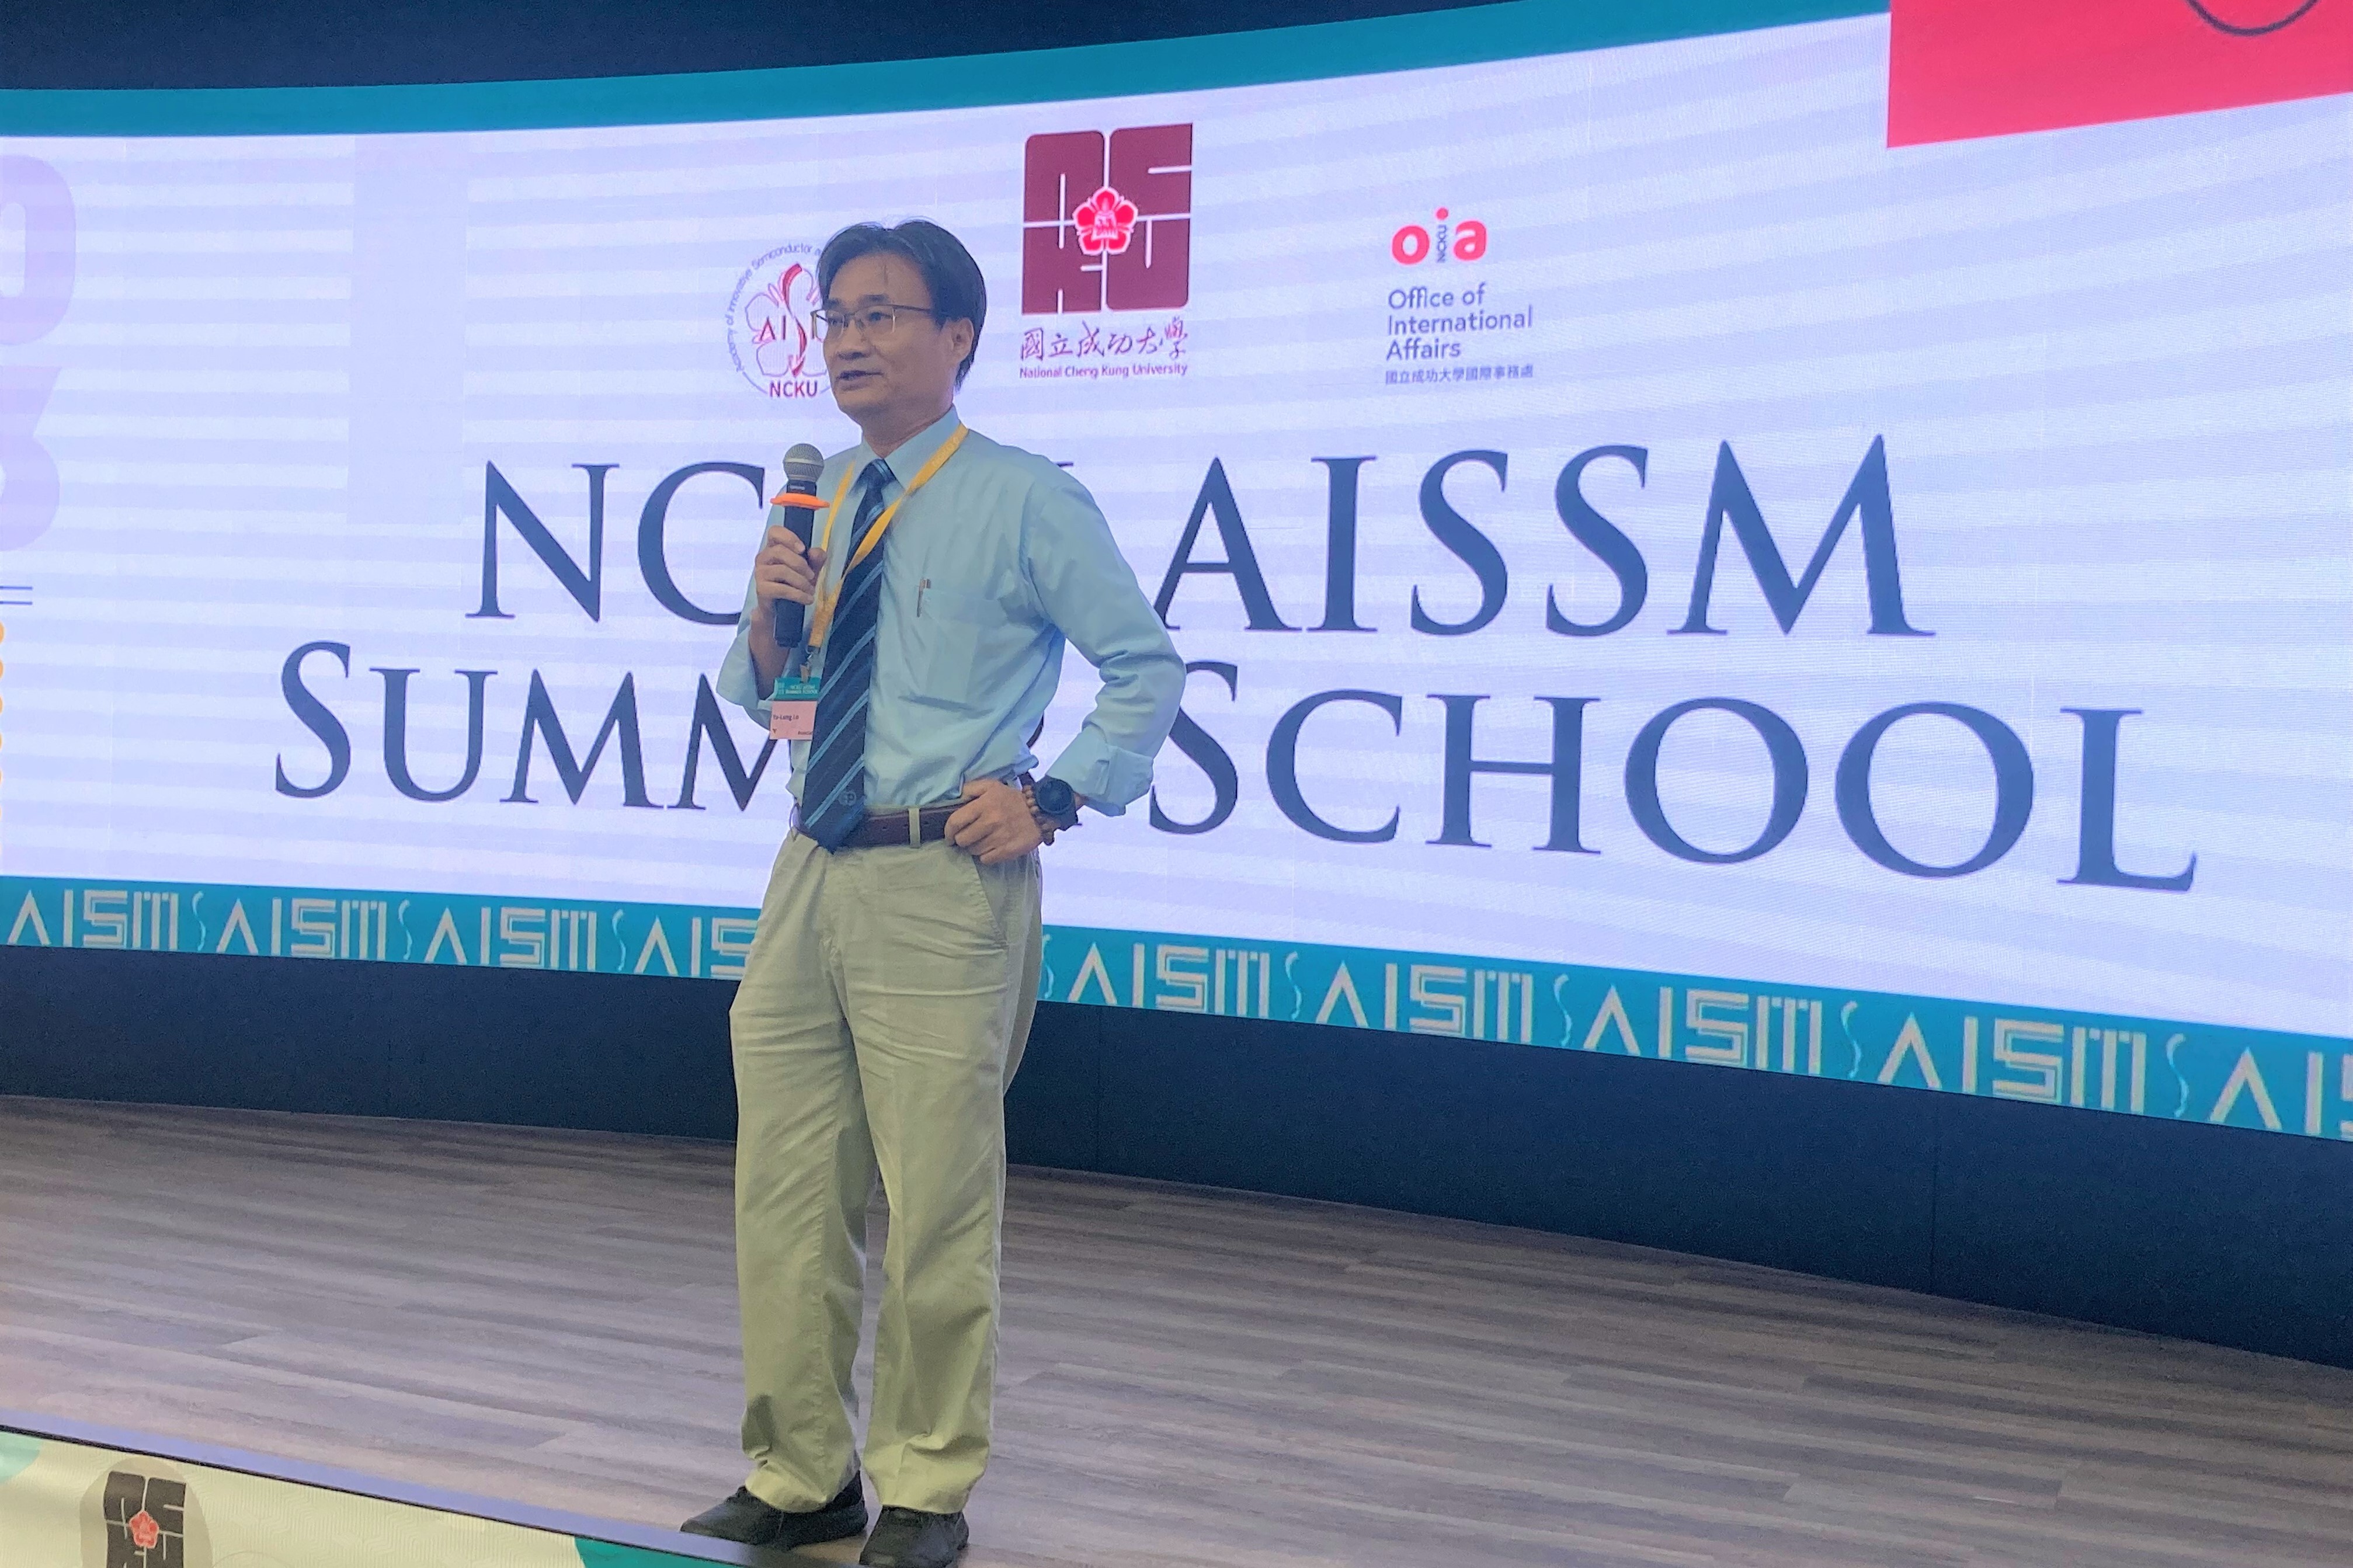 AISSM Associate Dean Yu-Lung Lo delivered a welcome remark at the opening ceremony on August 18